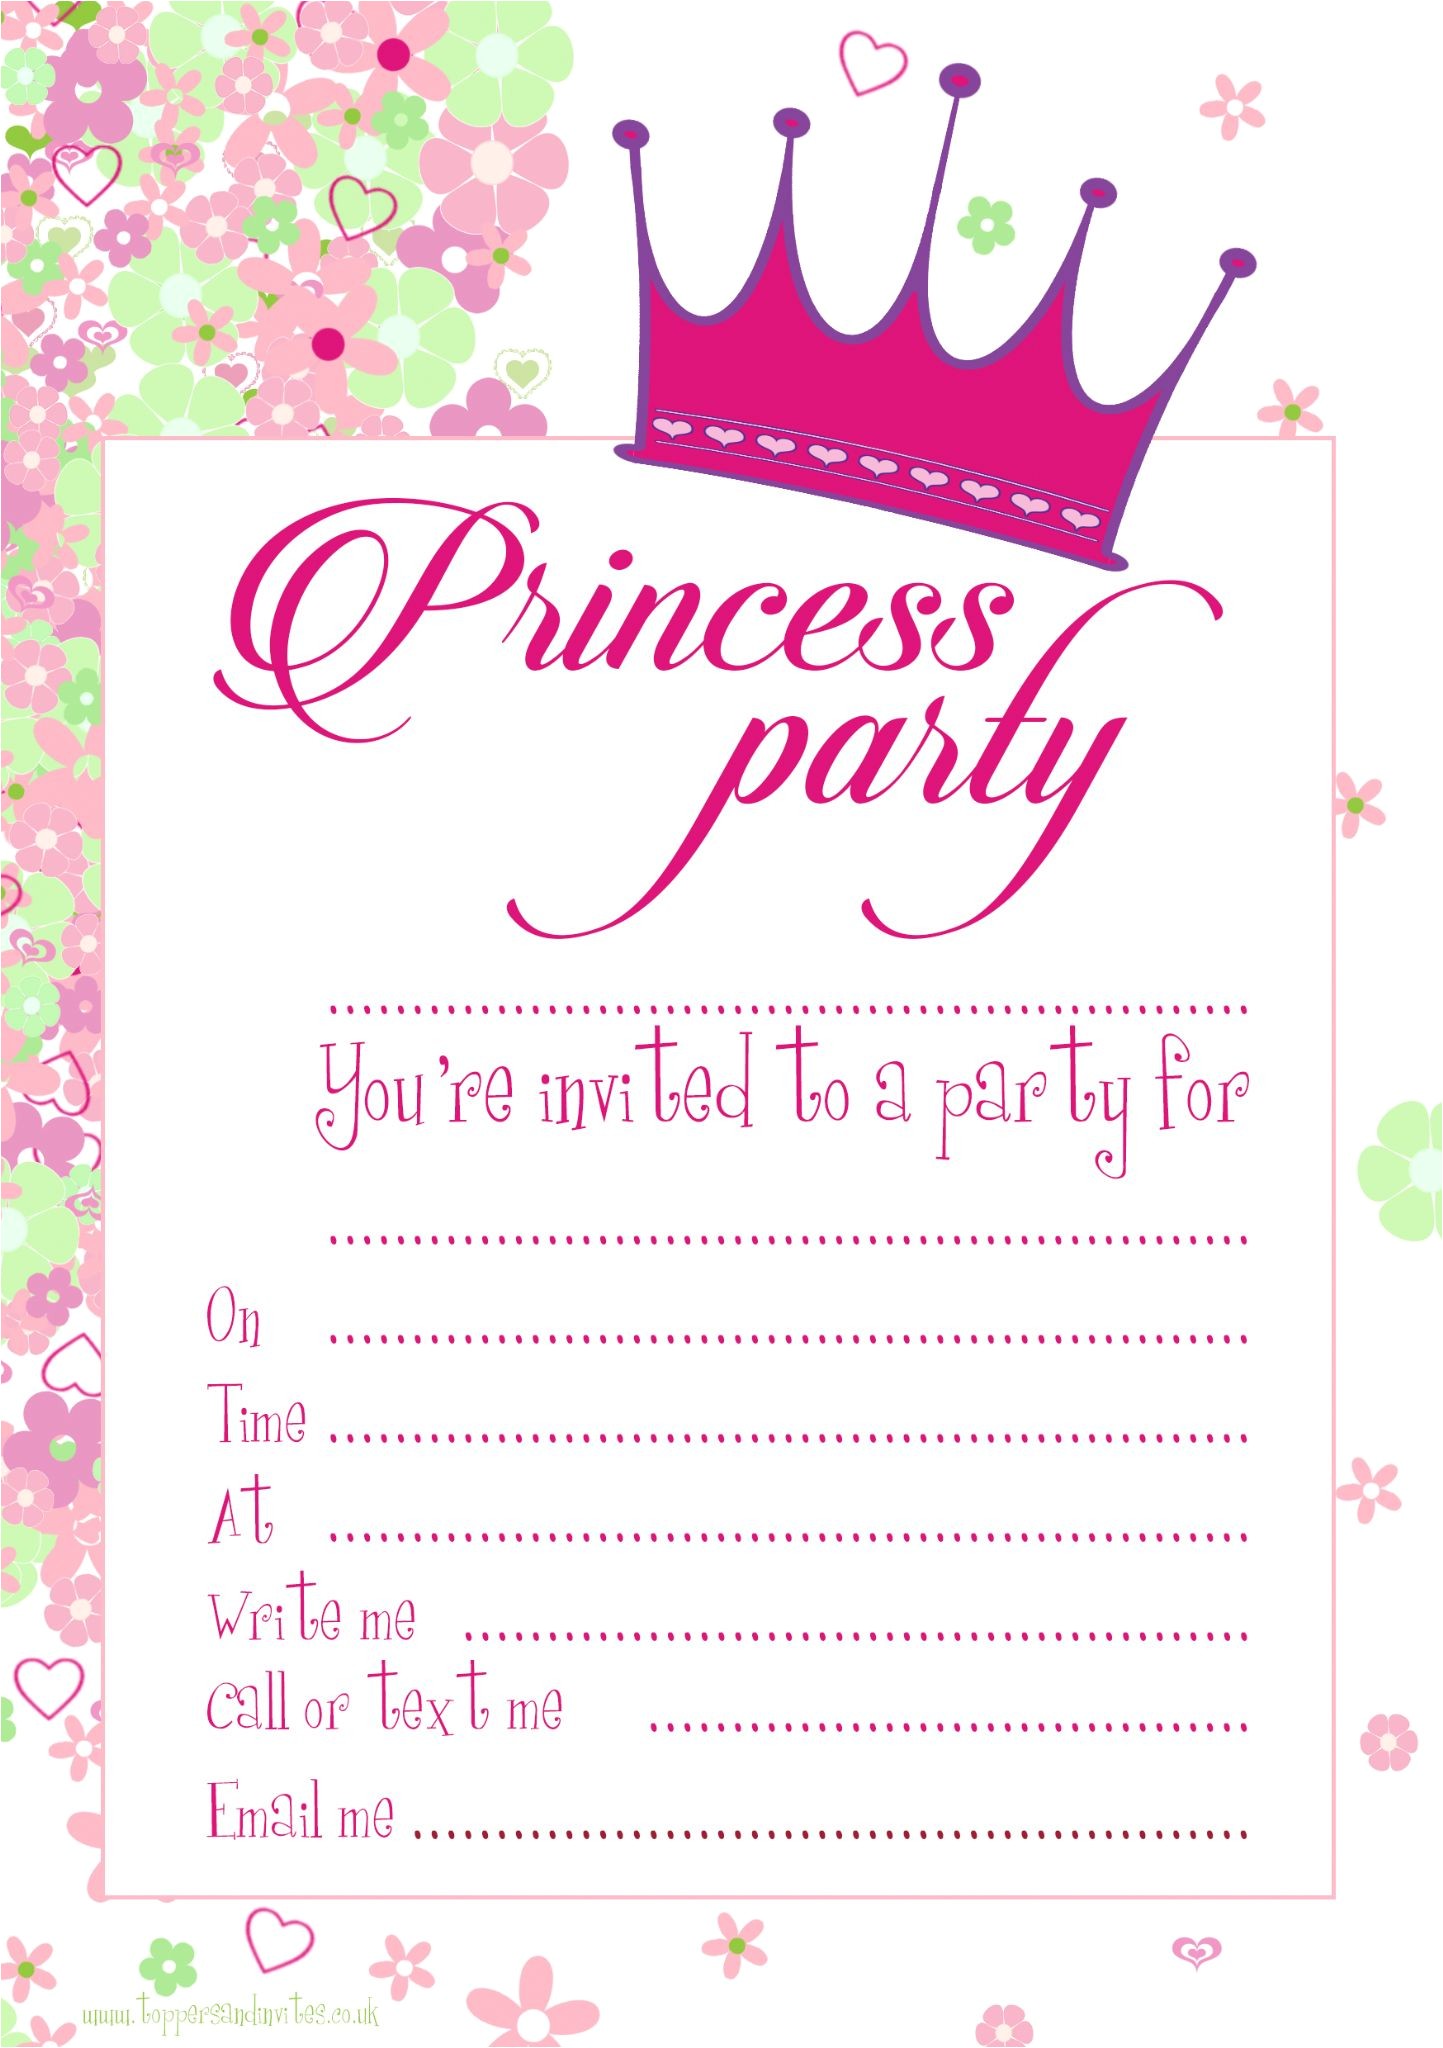 princess party birthday party invites with envelopes pack of 20 643 p